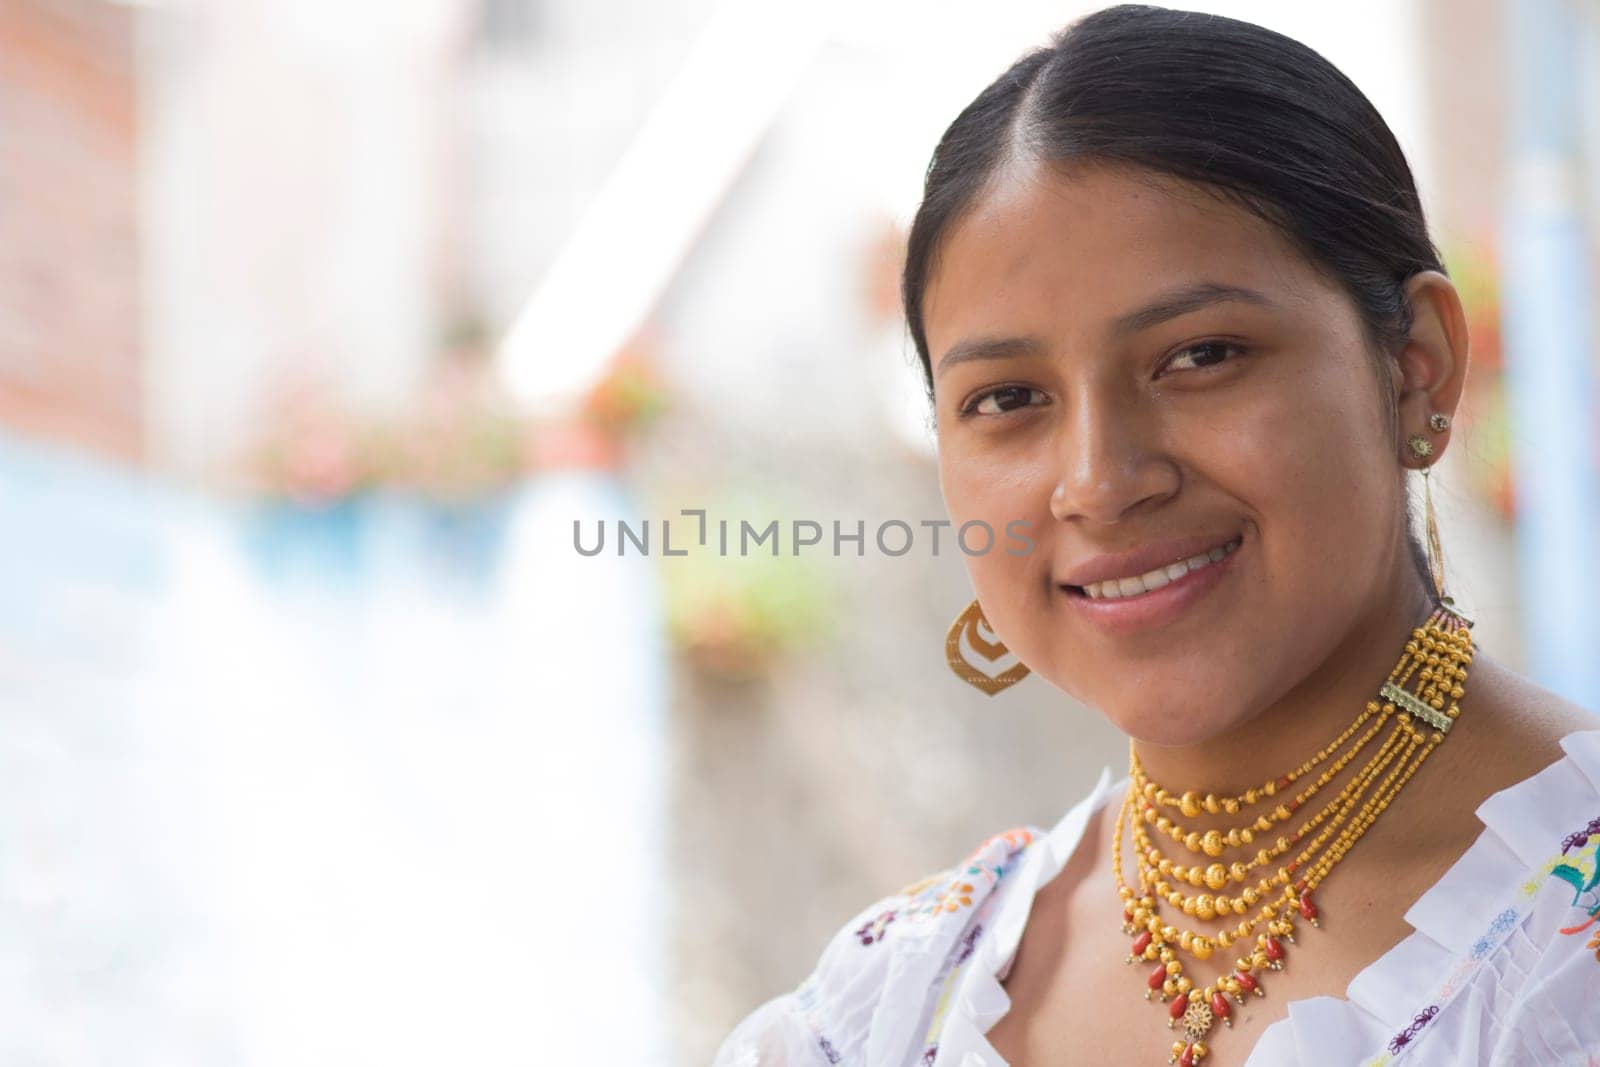 copy space of native from ecuador in the amazon looking at camera and smiling with earrings from her ethnic culture by Raulmartin